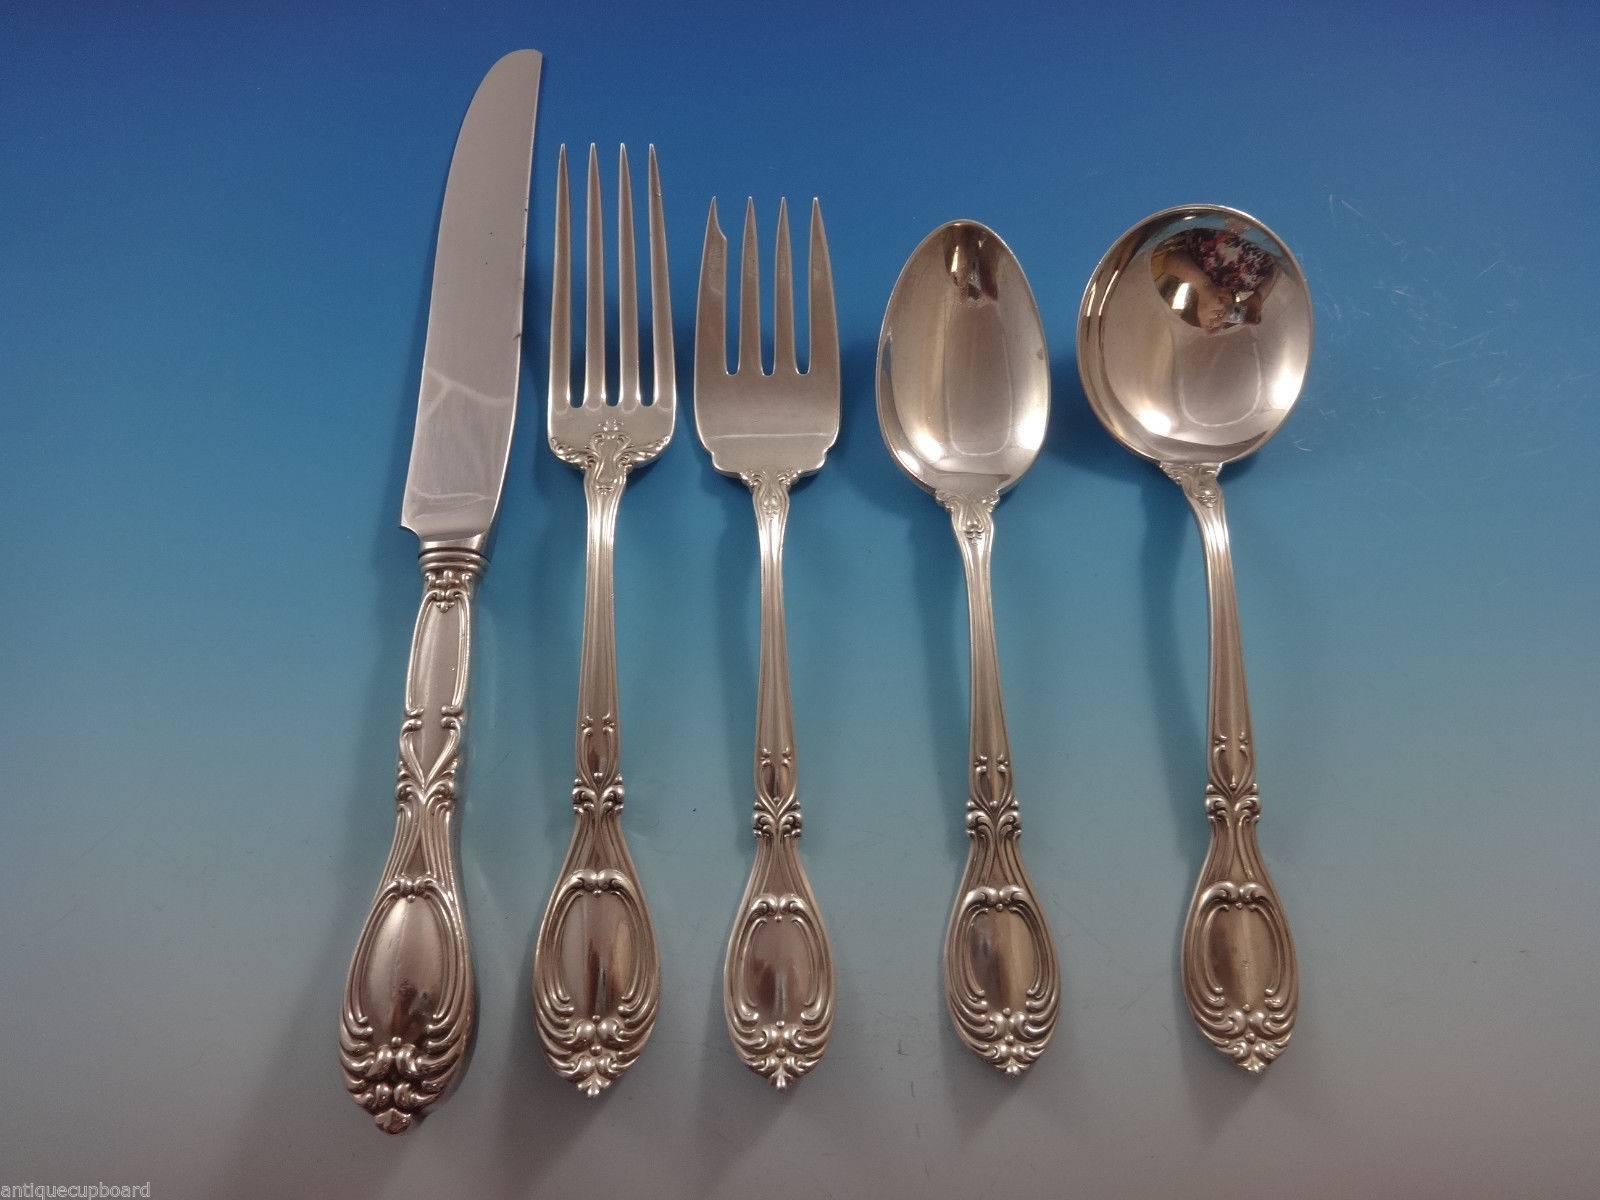 Victoria by Frank Whiting sterling silver 40 piece flatware set. This set includes:

Eight knives, 9